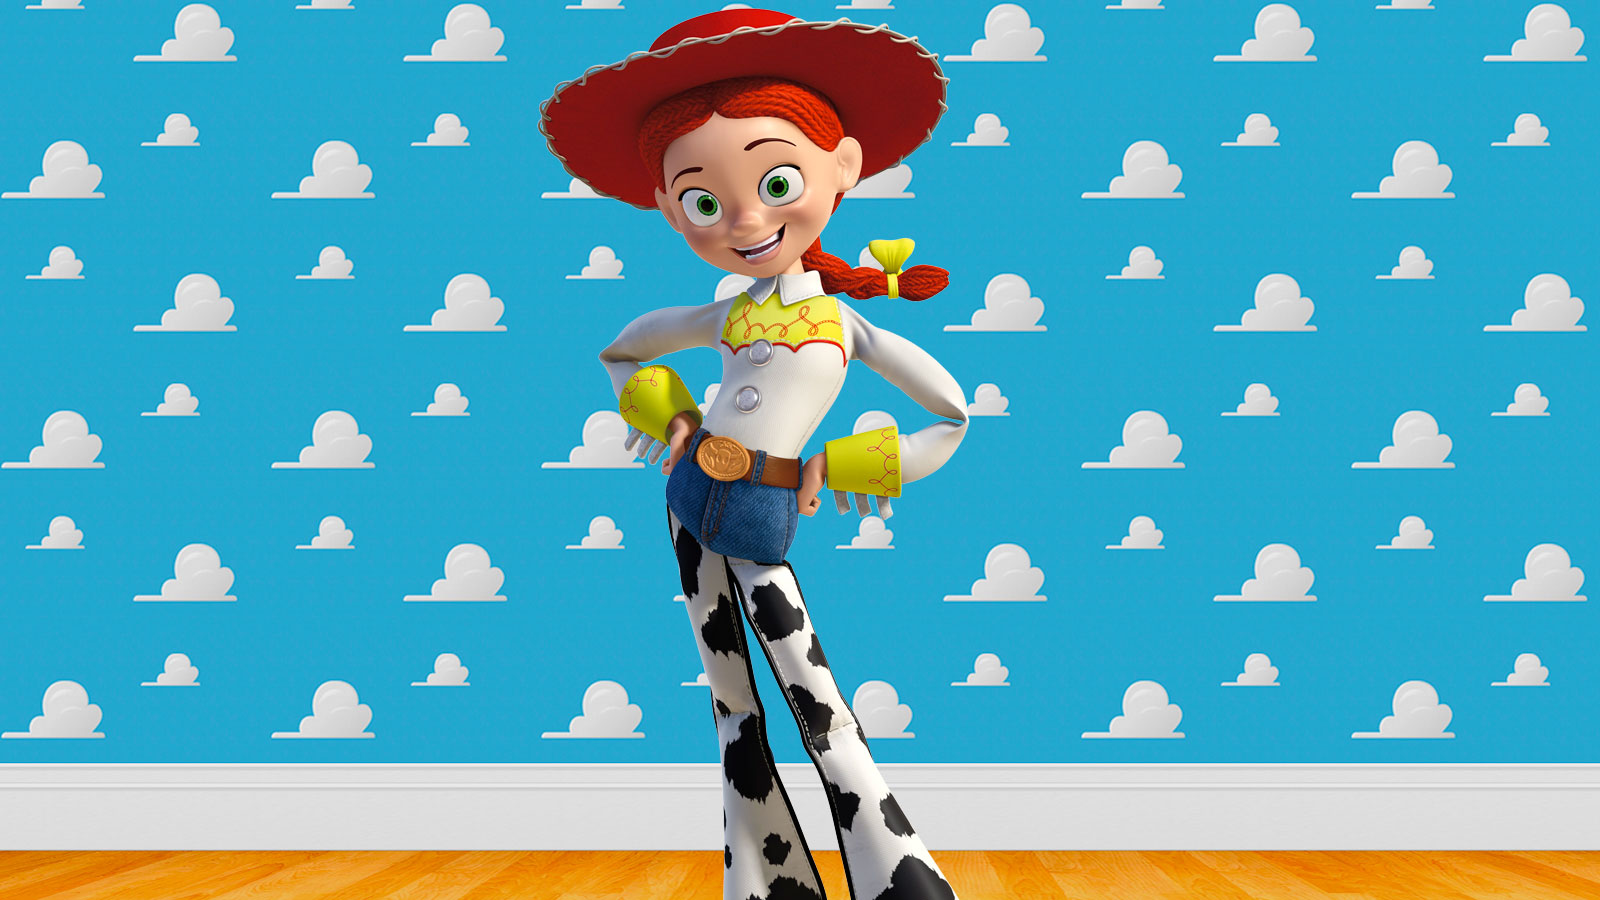 Do You Know the Names of These Toys from “Toy Story”? 39